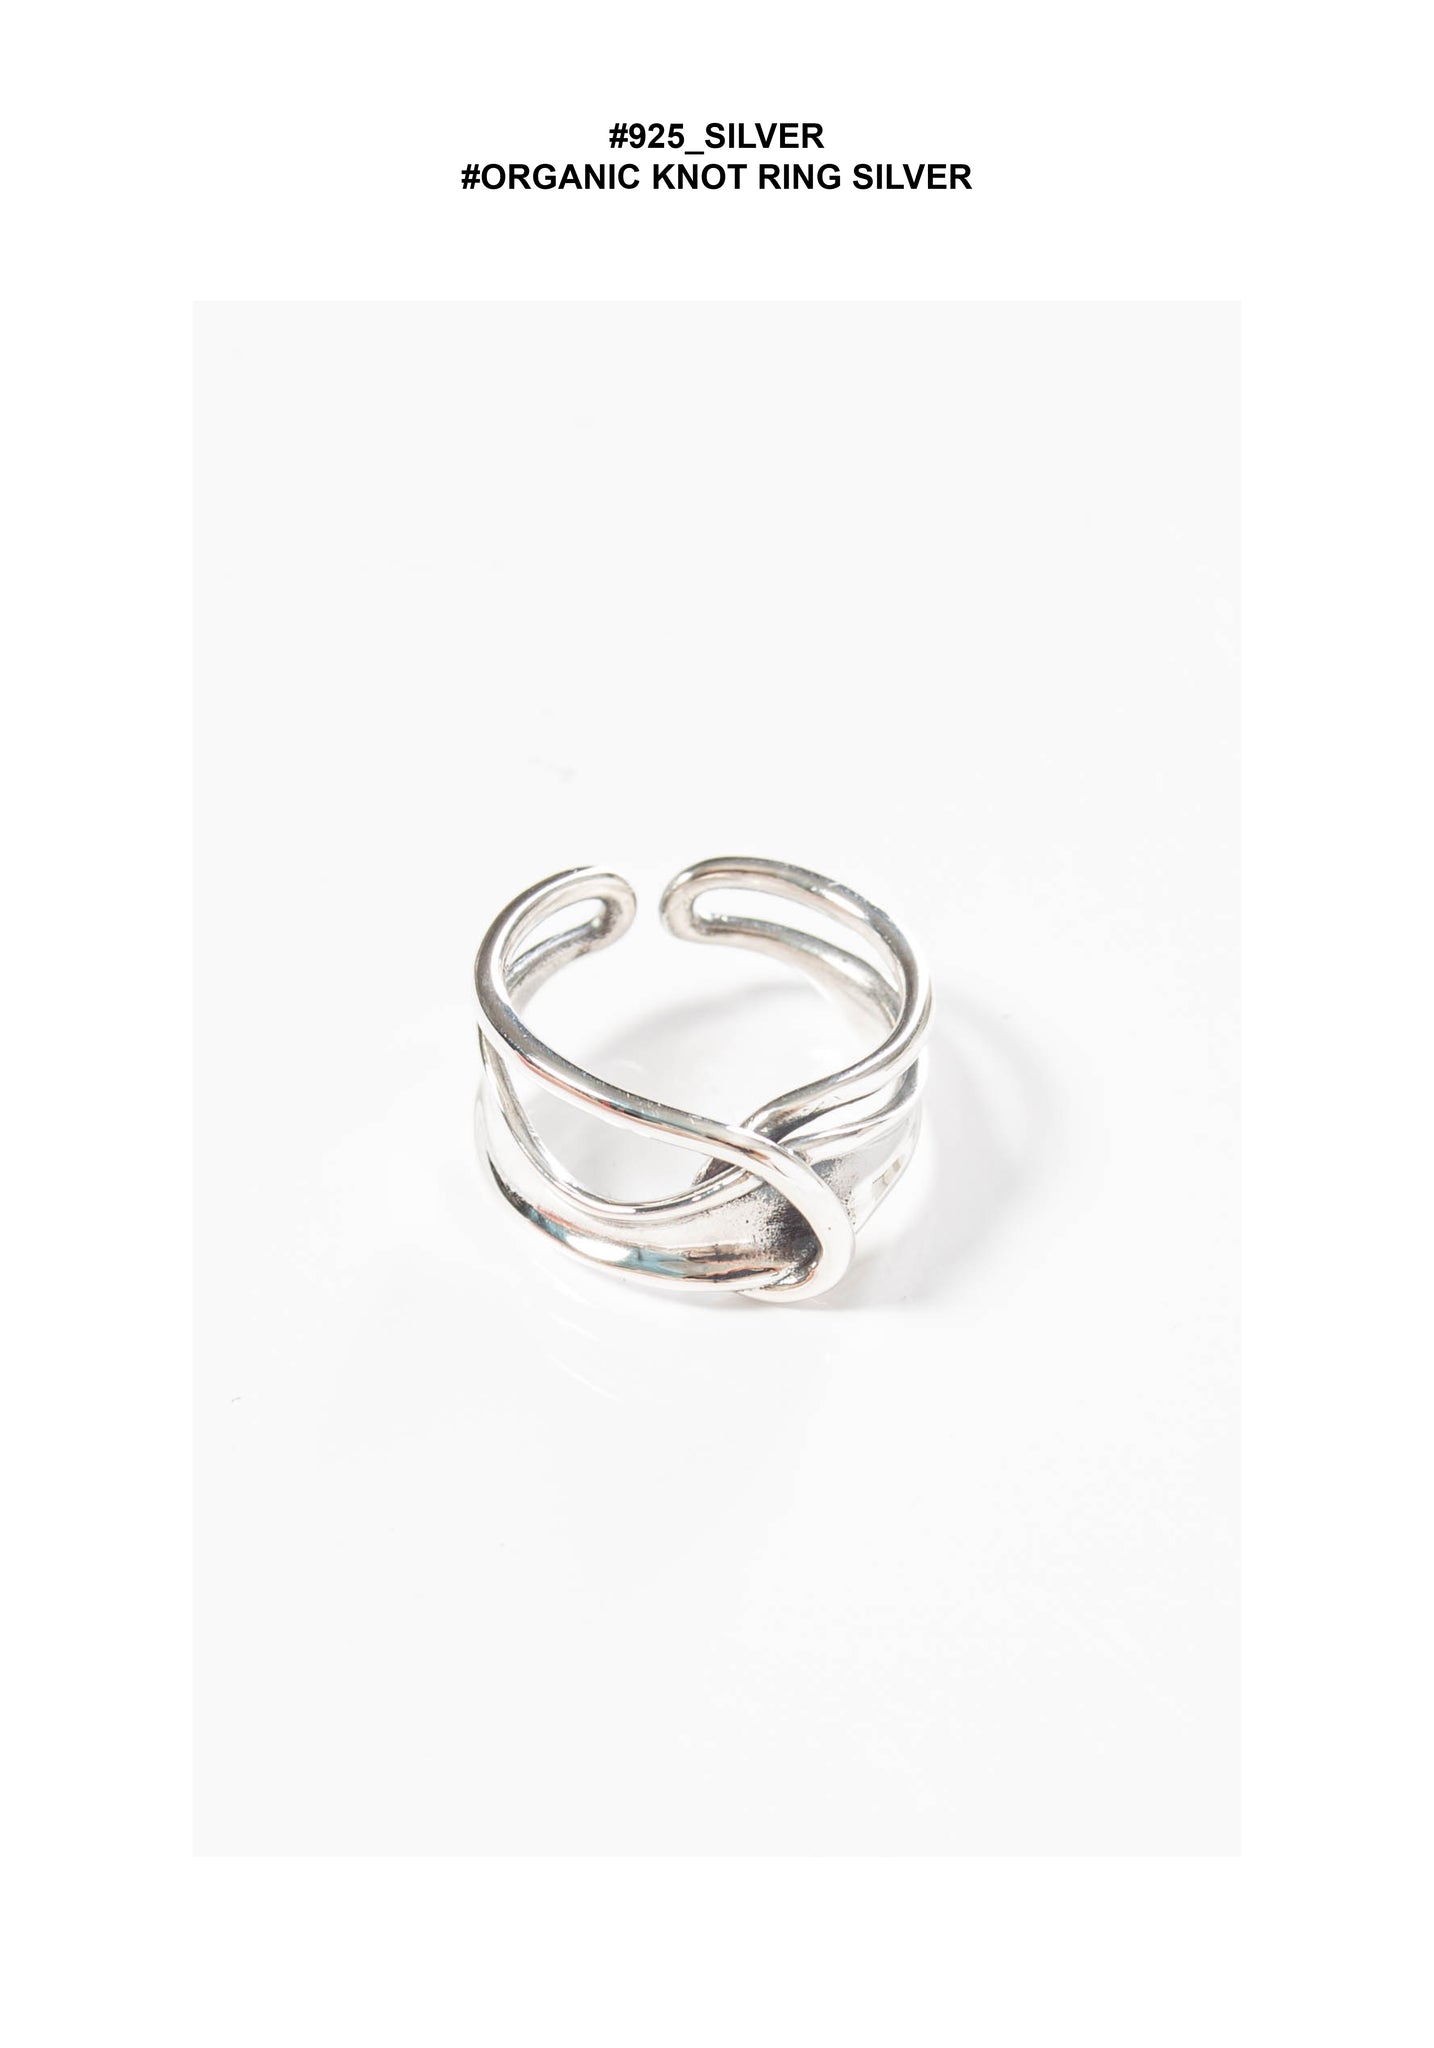 925 Silver Organic Knot Ring Silver